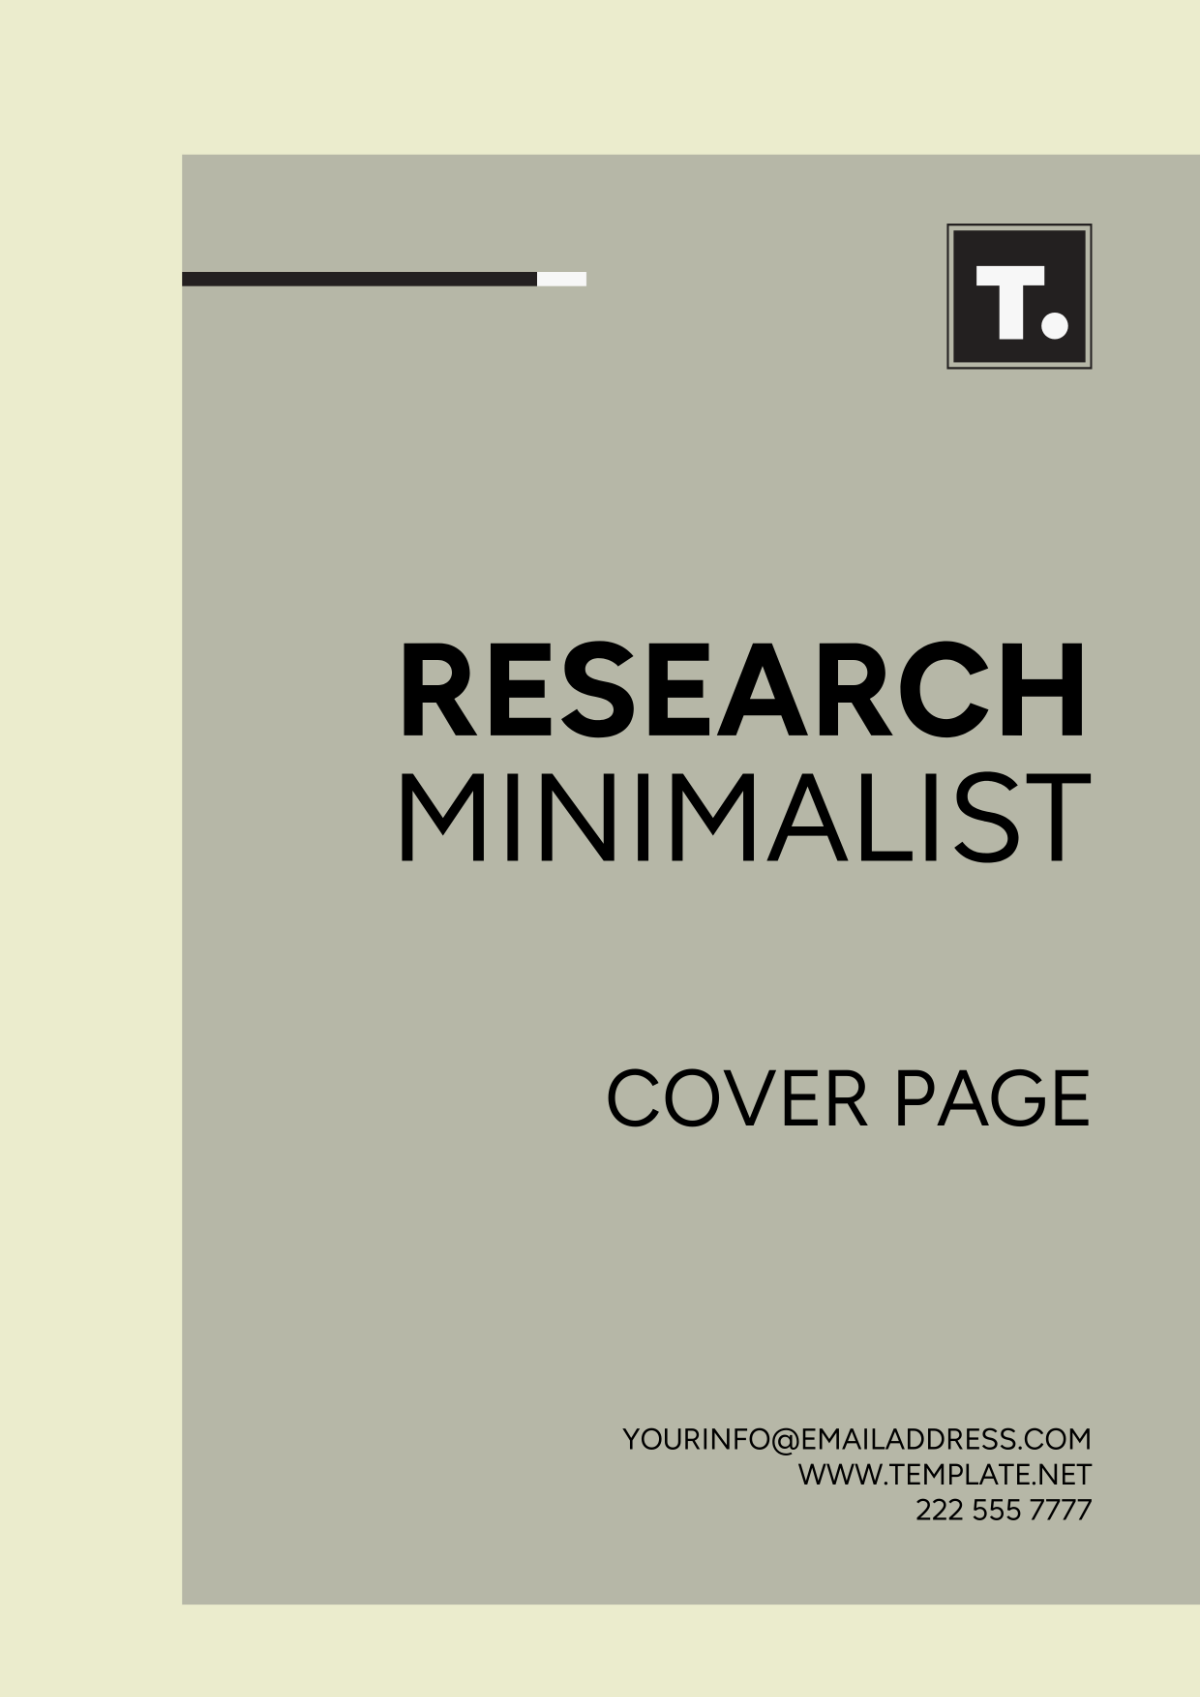 Research Minimalist Cover Page Template